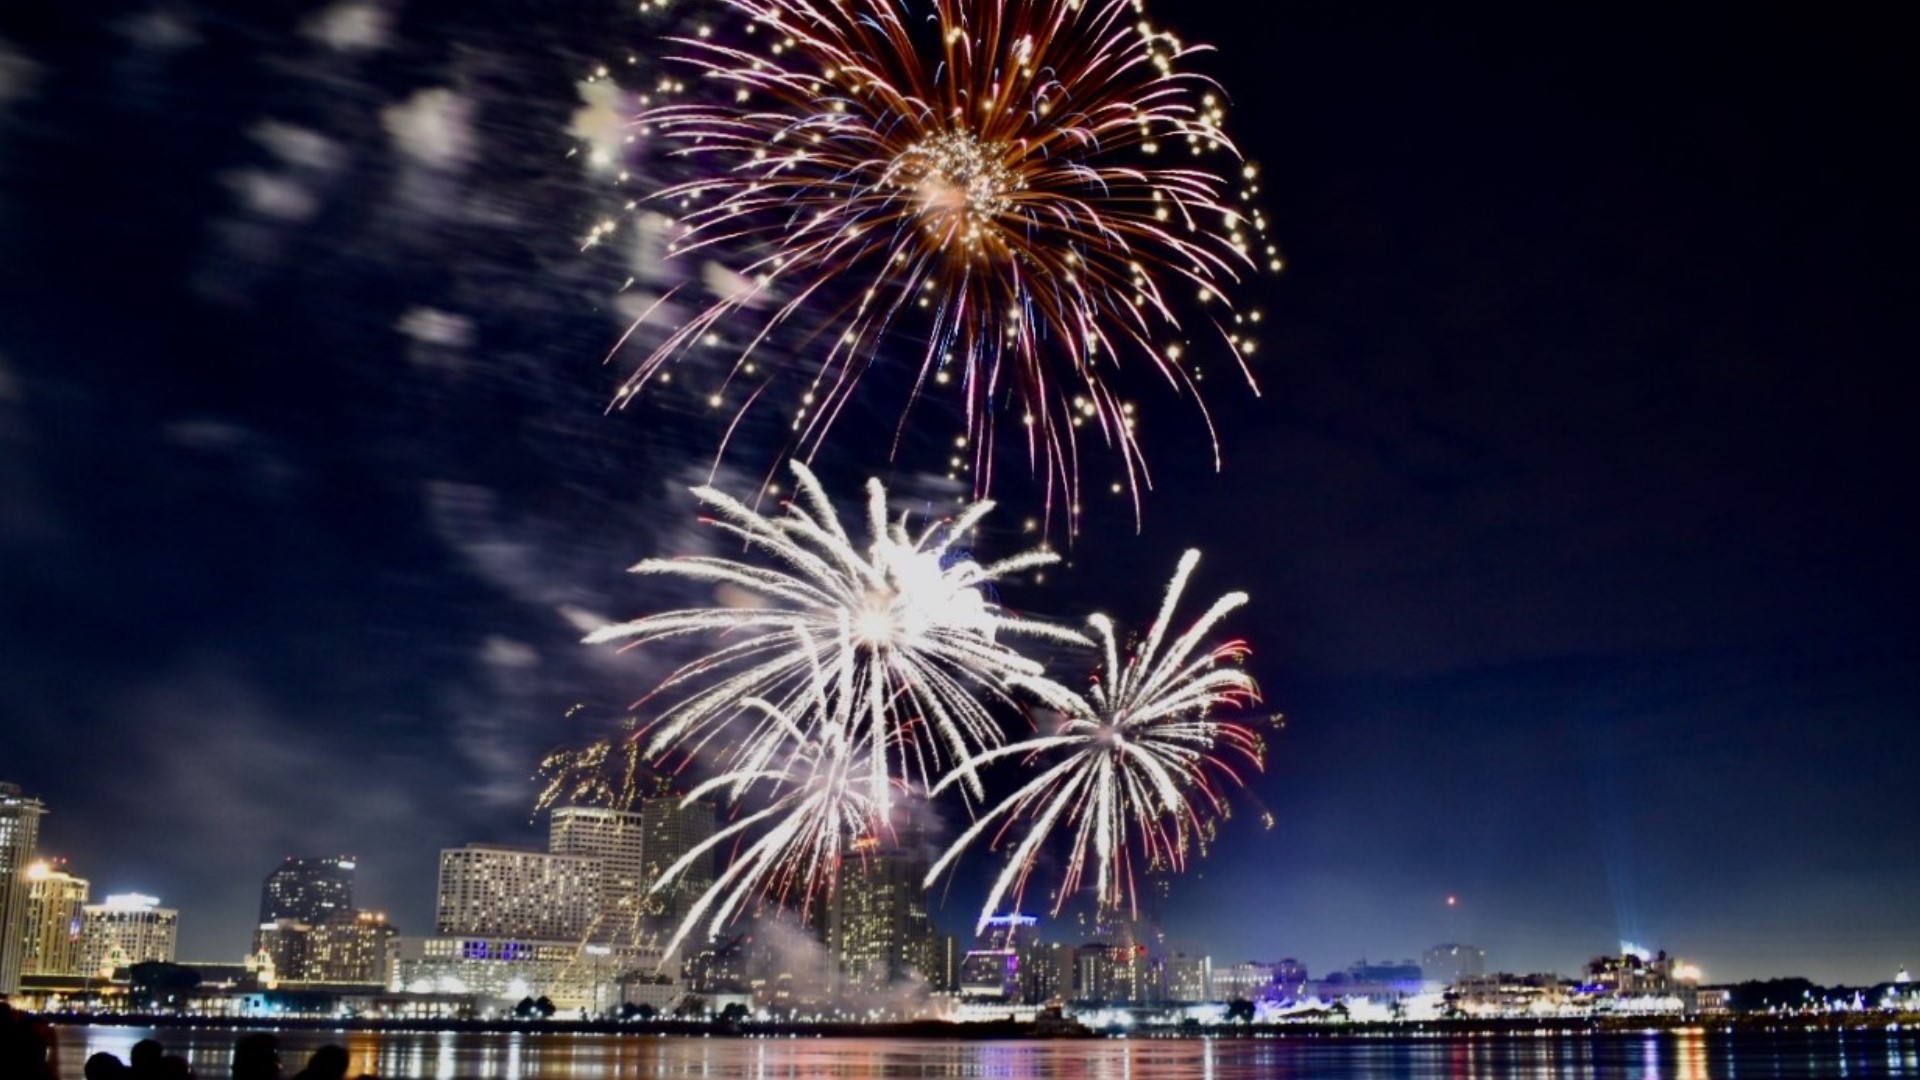 It was quite a show on the New Orleans riverfront as a spectacular fireworks display rang in 2022.